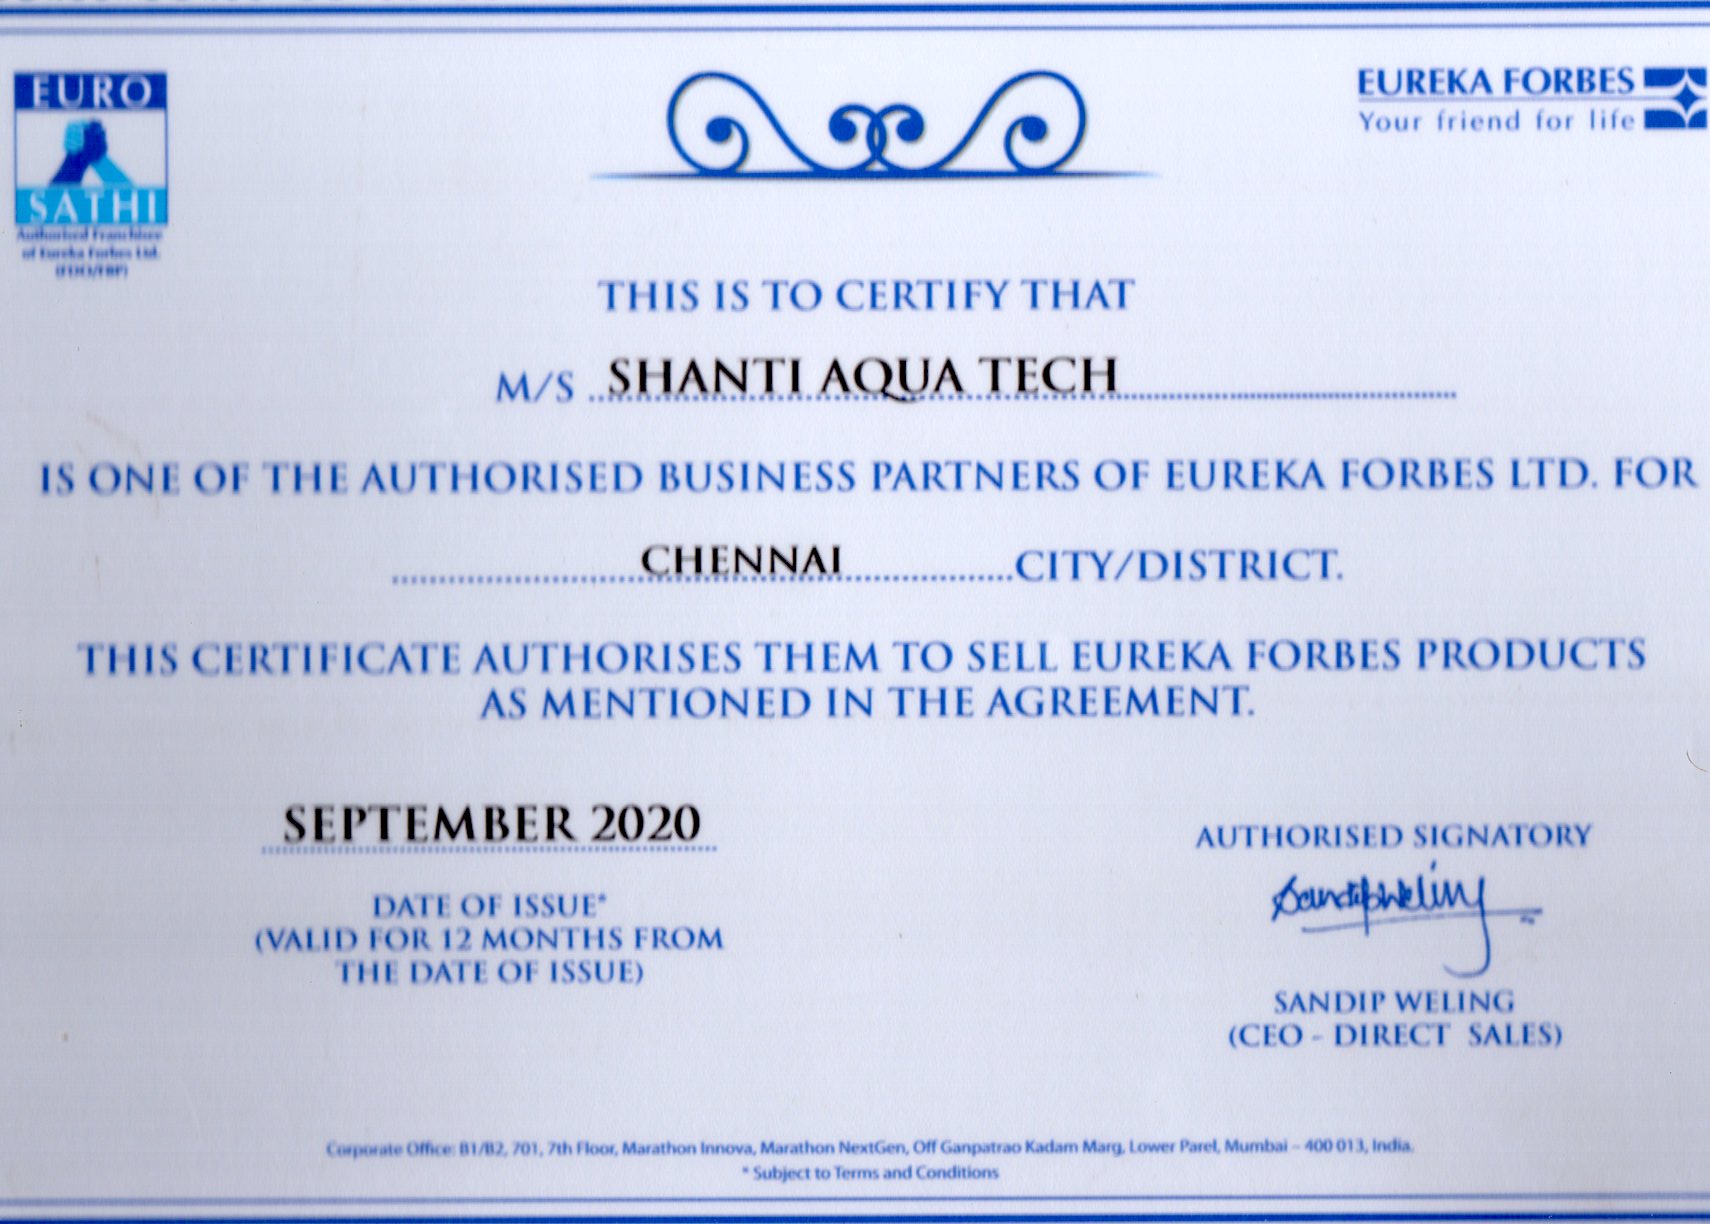 Shanthi AquaTech is Eureka Forbes Franchisee Business Partner. Issued Septembe 2020 till 2021